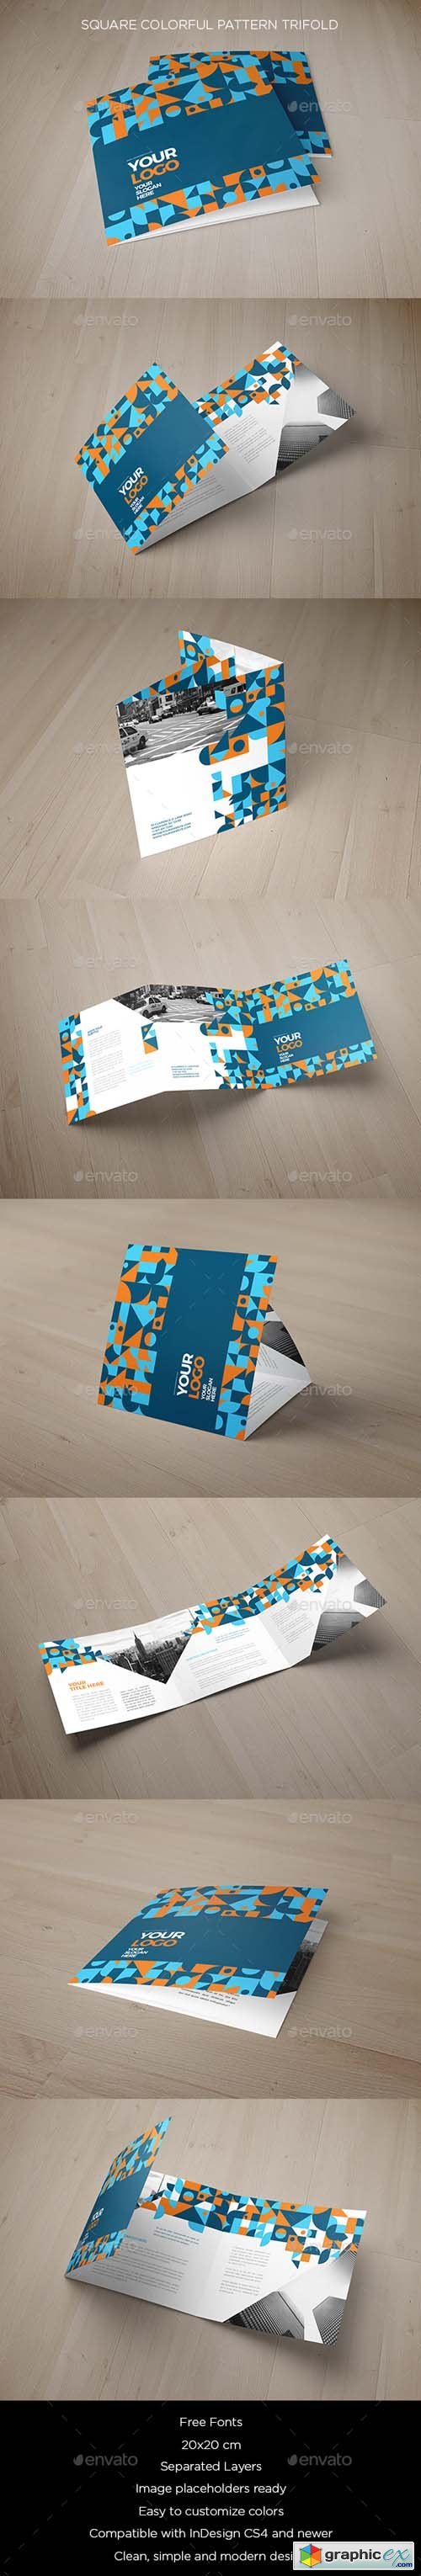 Square Colorful Pattern Trifold